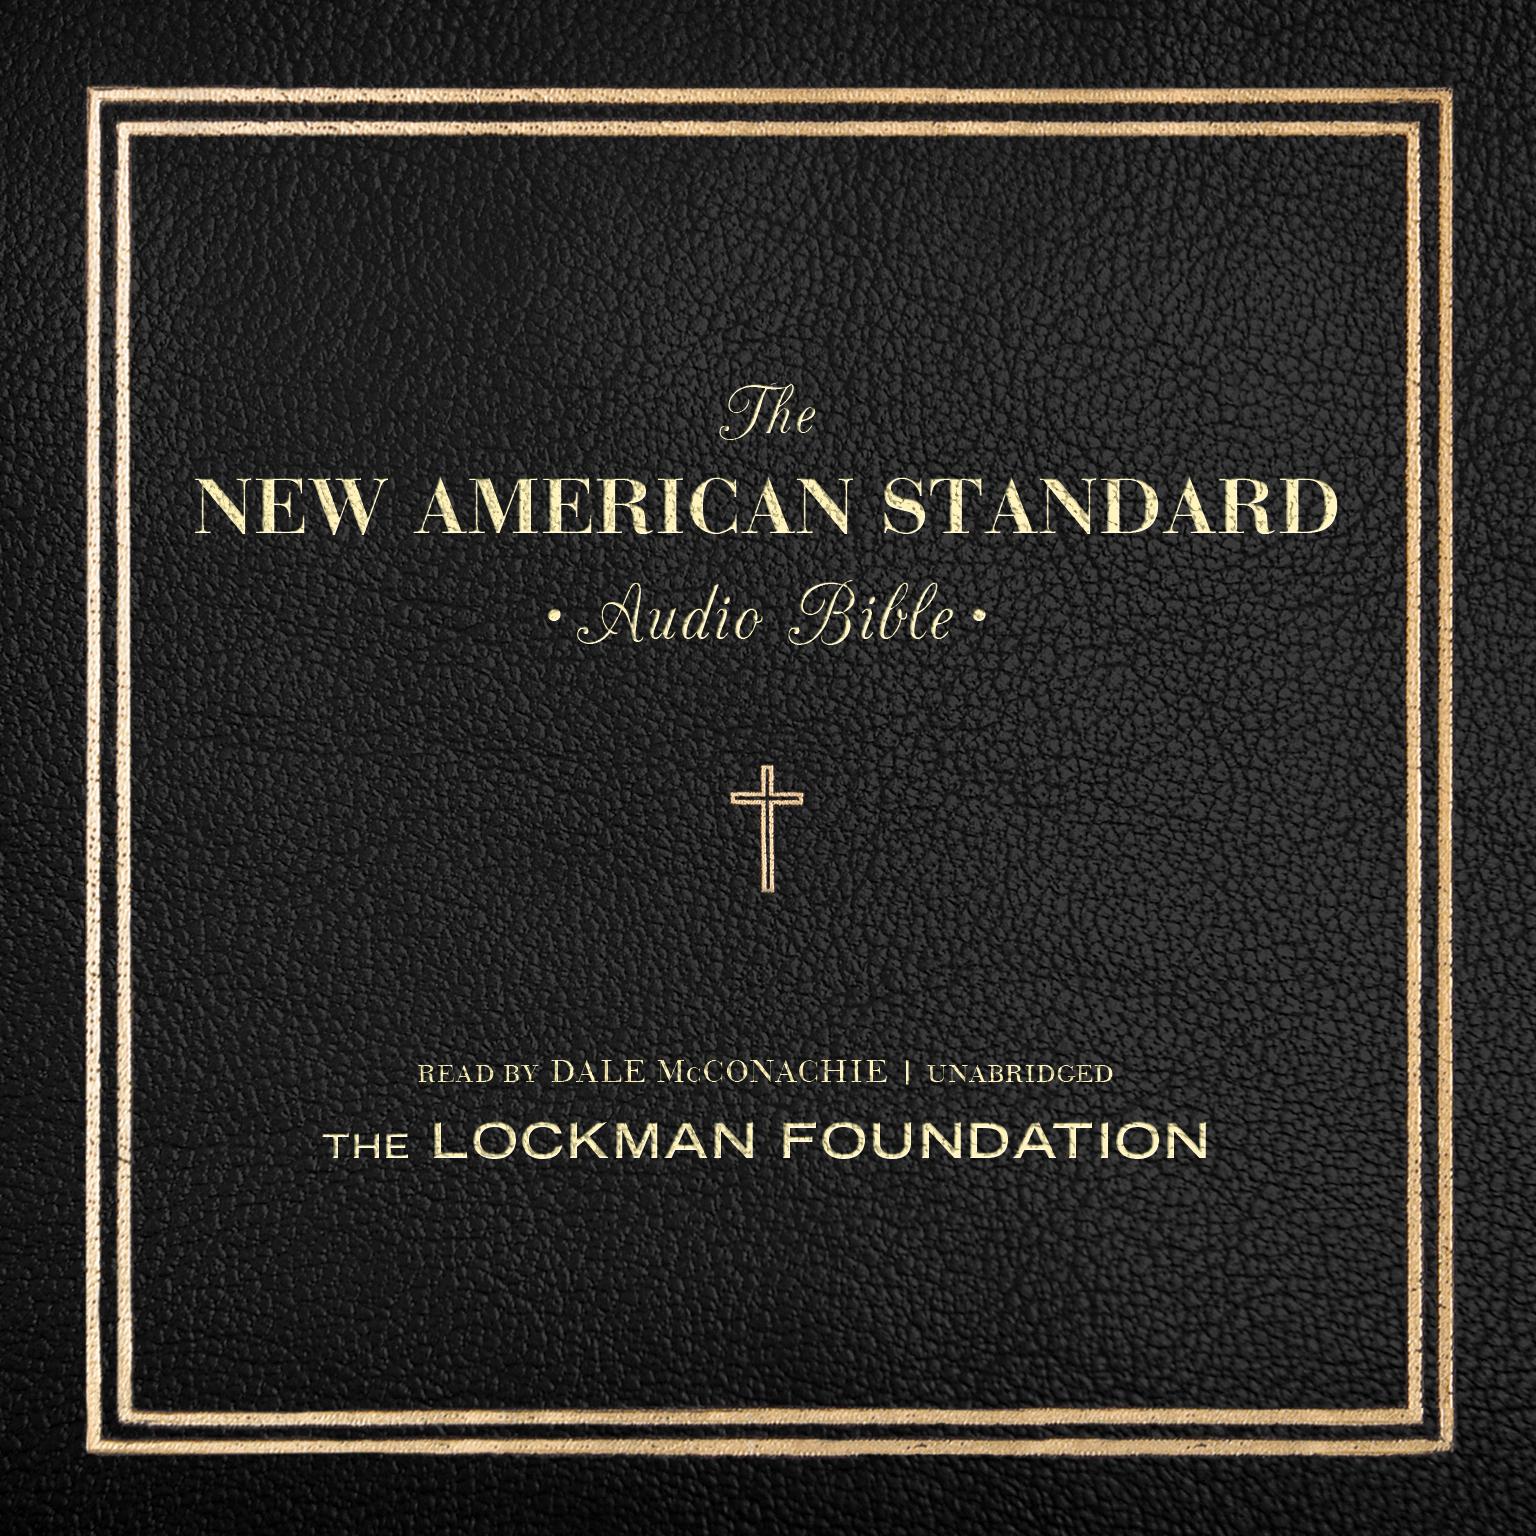 The New American Standard Audio Bible Audiobook, by the Lockman Foundation